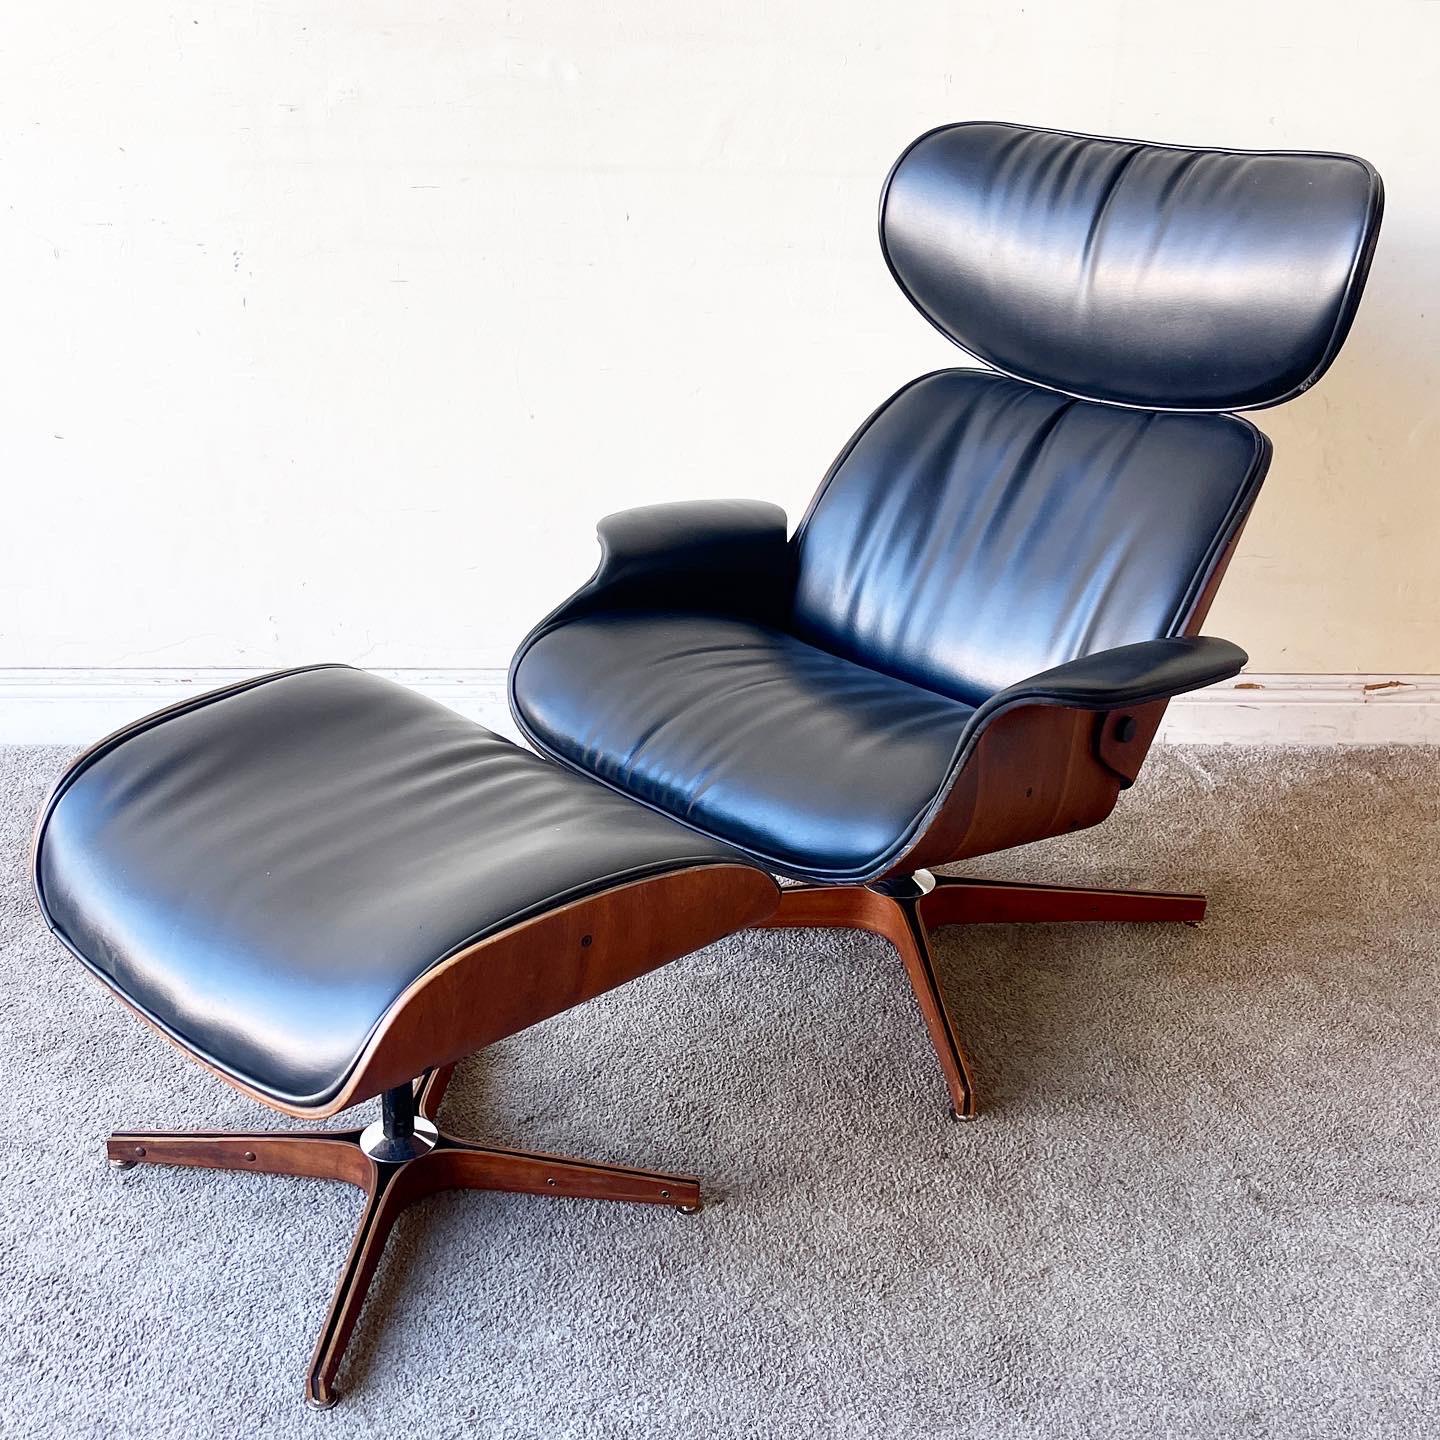 This vintage mid-century lounge chair and ottoman was designed by George Mulhauser for Plycraft, USA, 1960's. Features molded walnut shells and bases with beautiful details to the wood grain. All original black naugahyde upholstery.

Ottoman